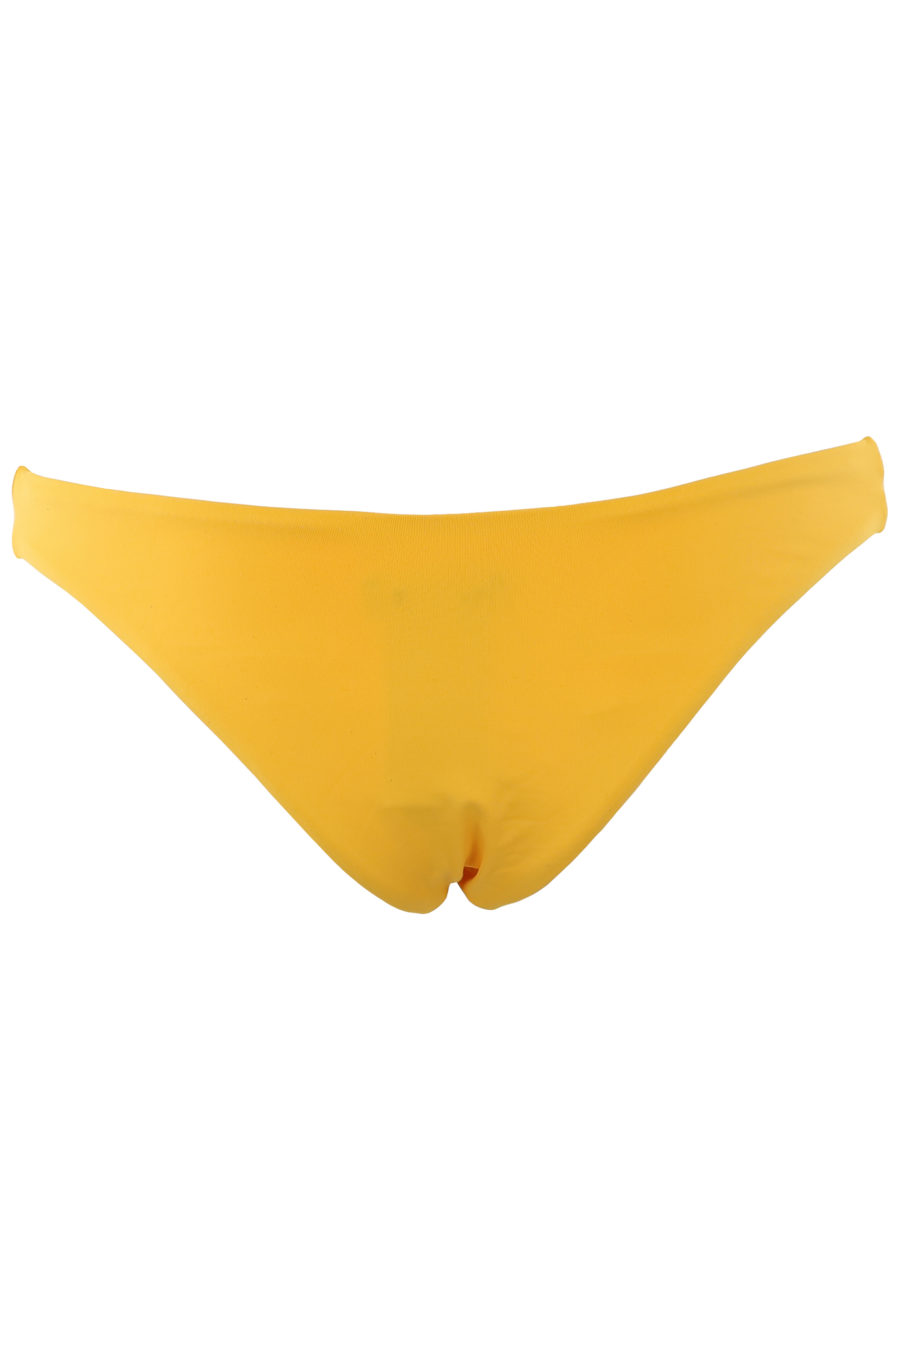 Yellow swimming costume with small metal lettering logo - IMG 1314